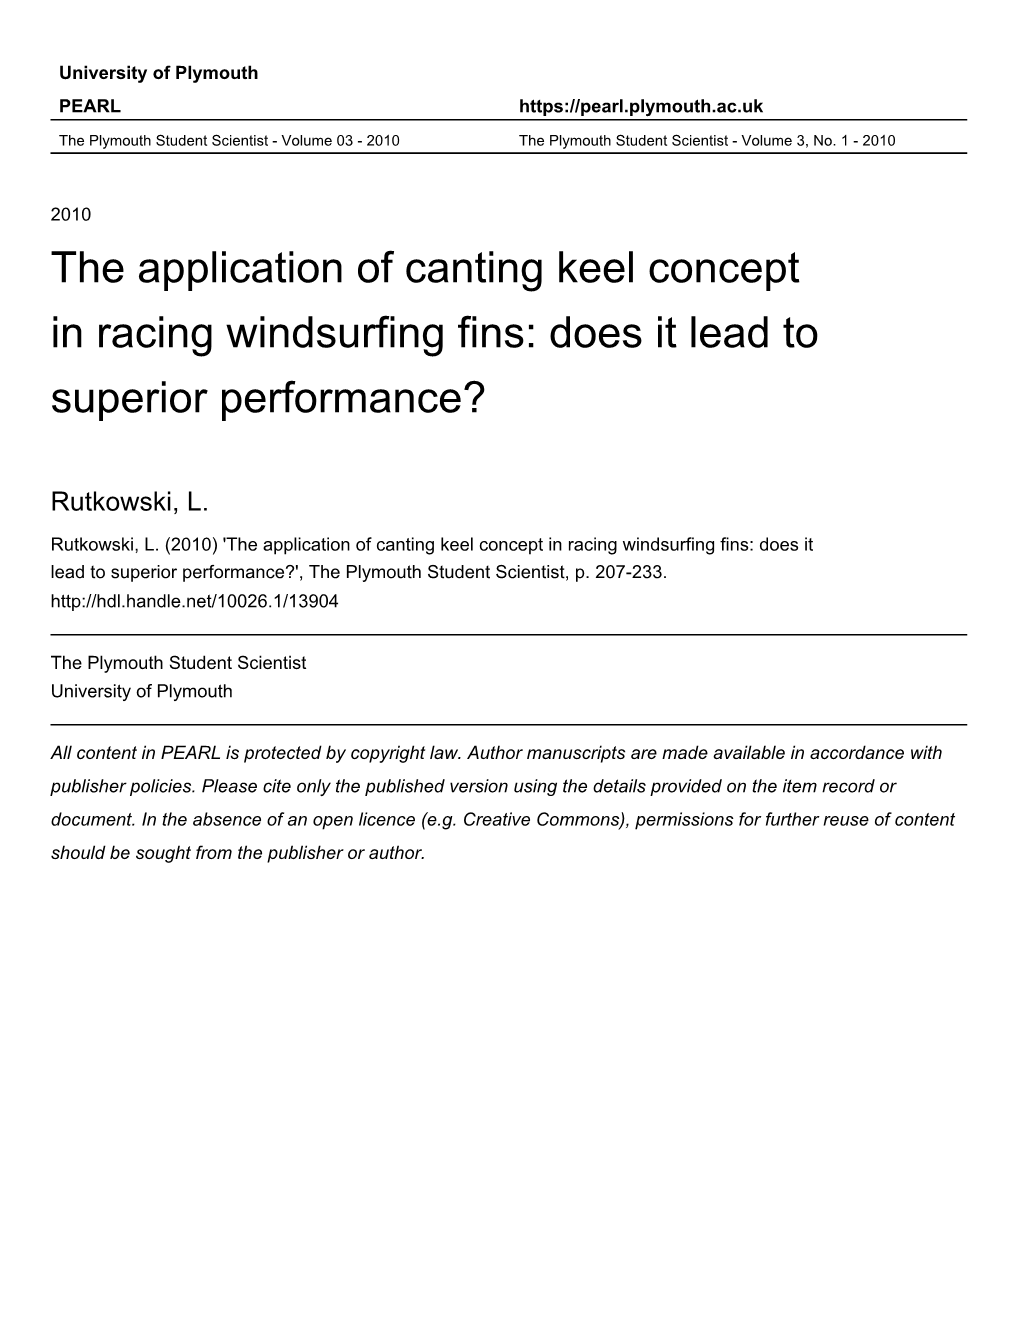 The Application of Canting Keel Concept in Racing Windsurfing Fins: Does It Lead to Superior Performance?